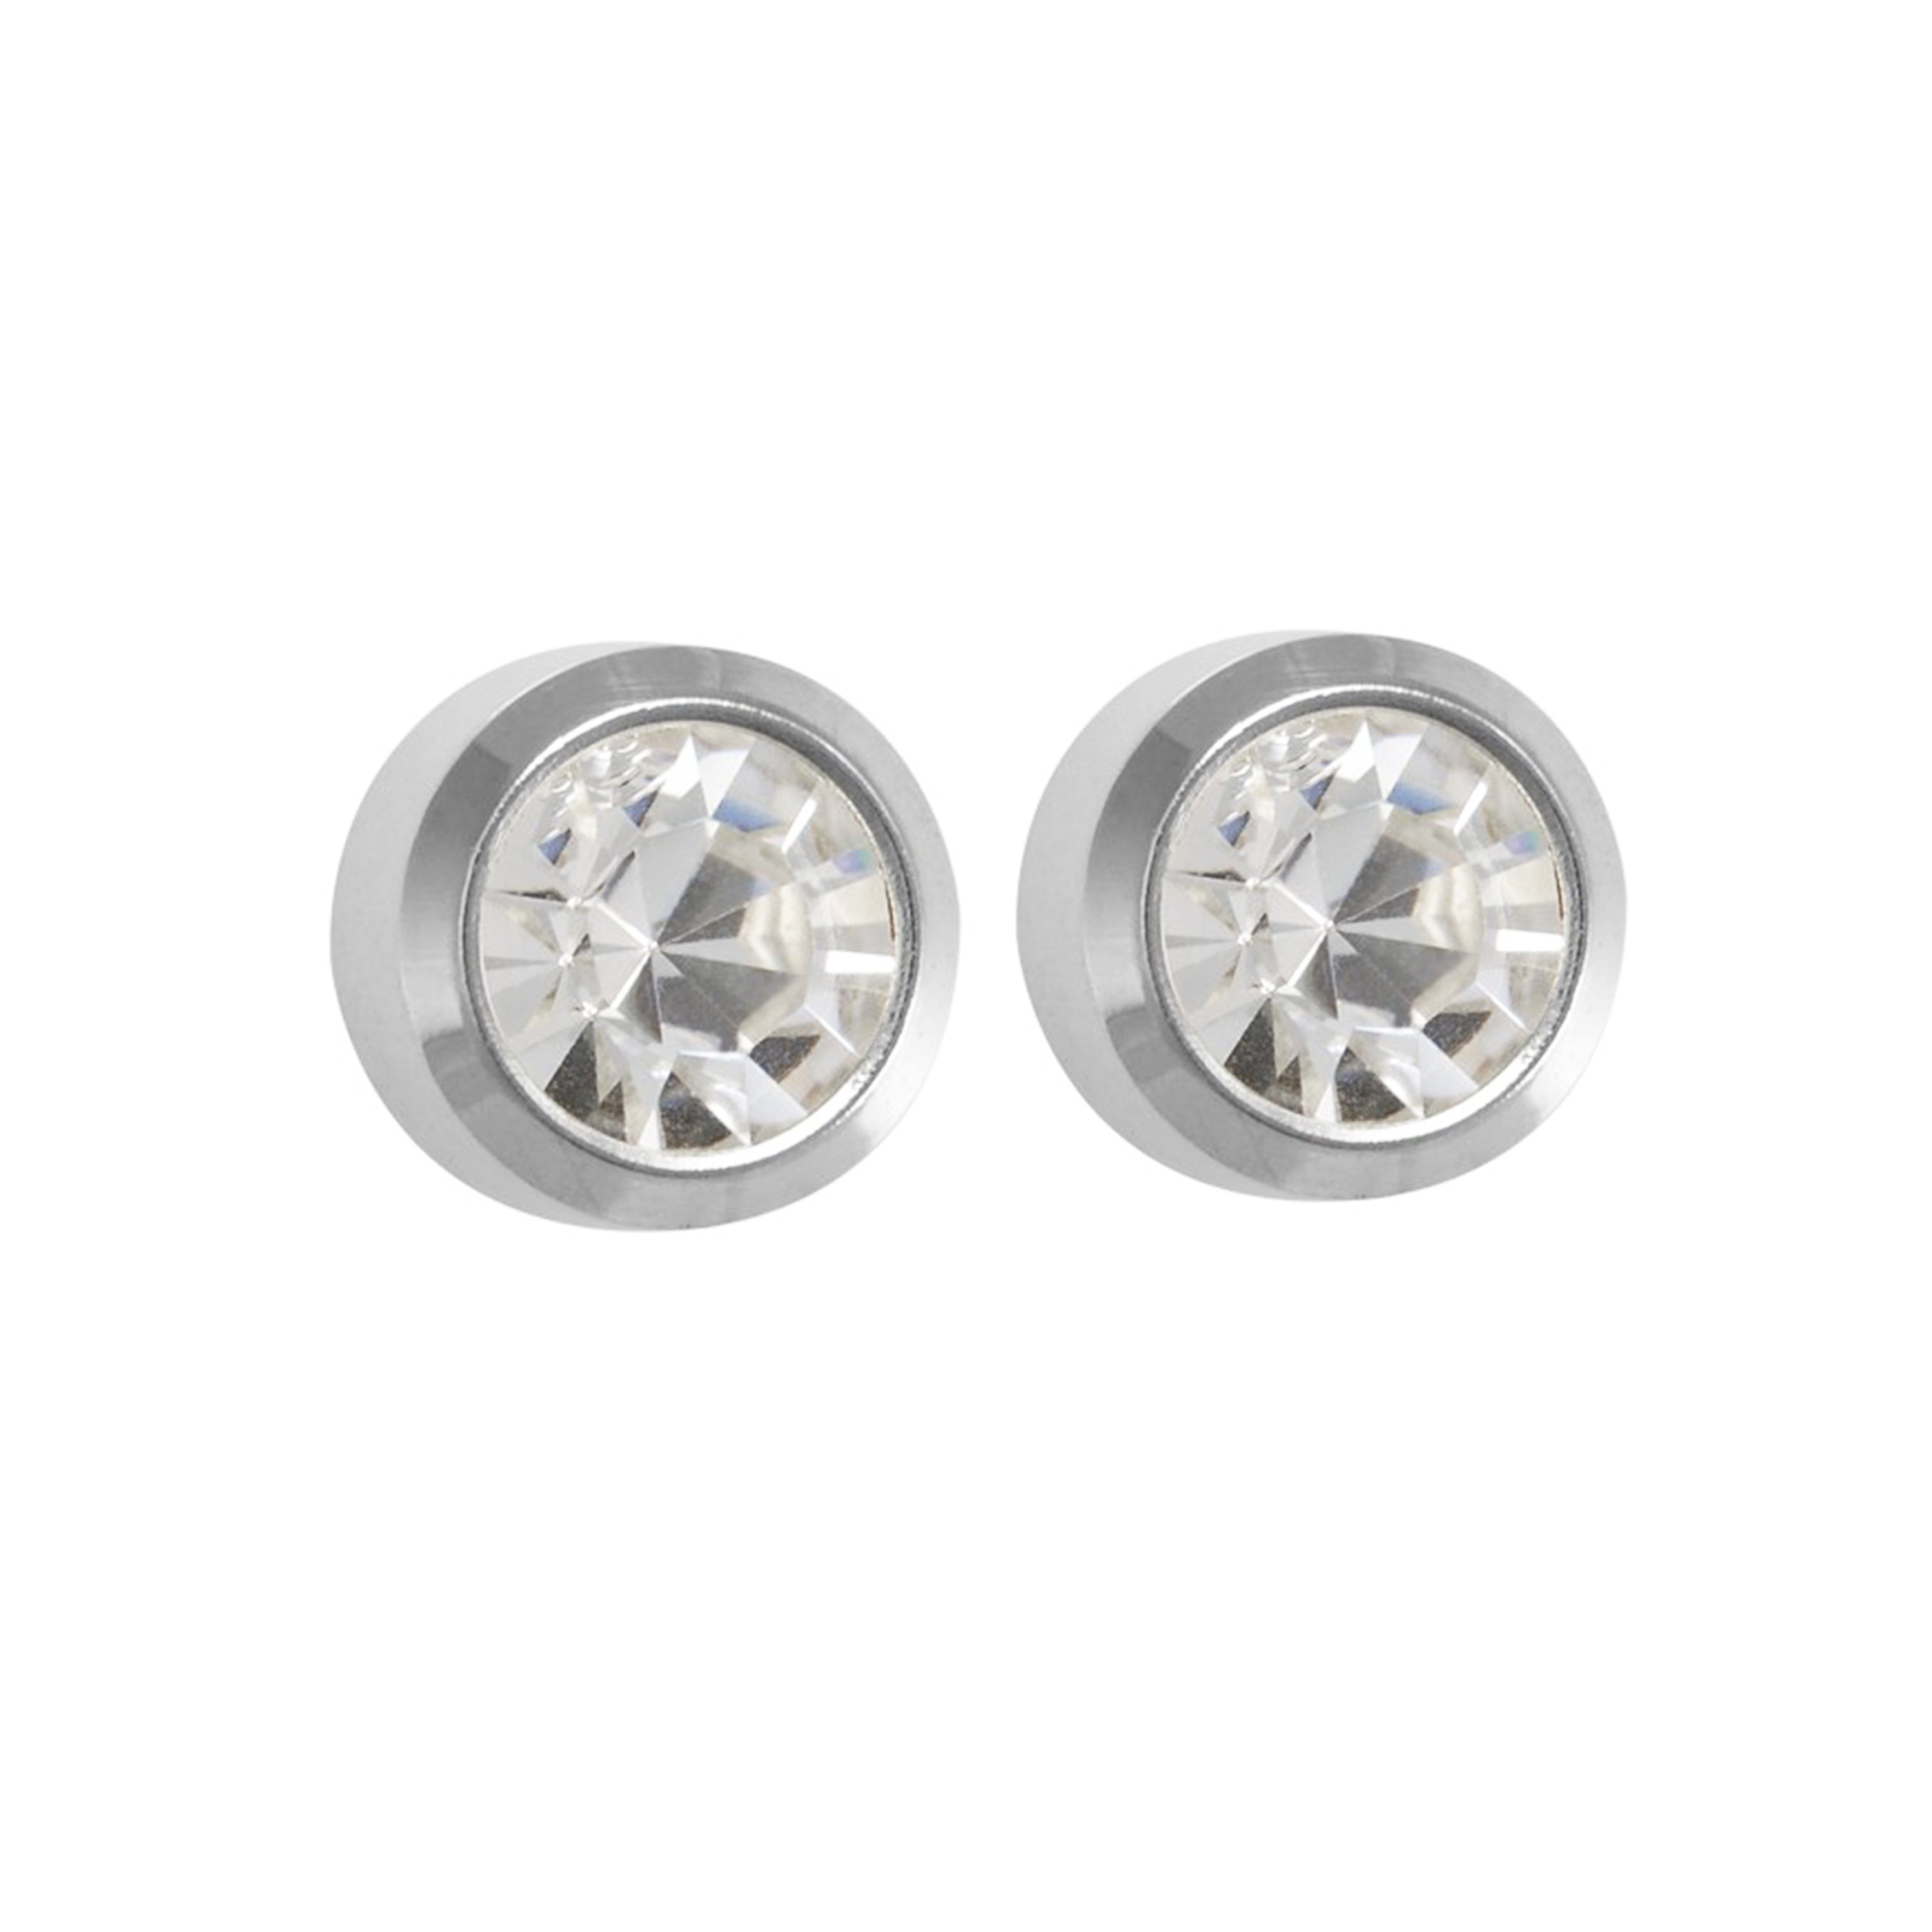 2MM April – Crystal Bezel Allergy free Stainless Steel Ear Studs | MADE IN USA | Ideal for everyday wear